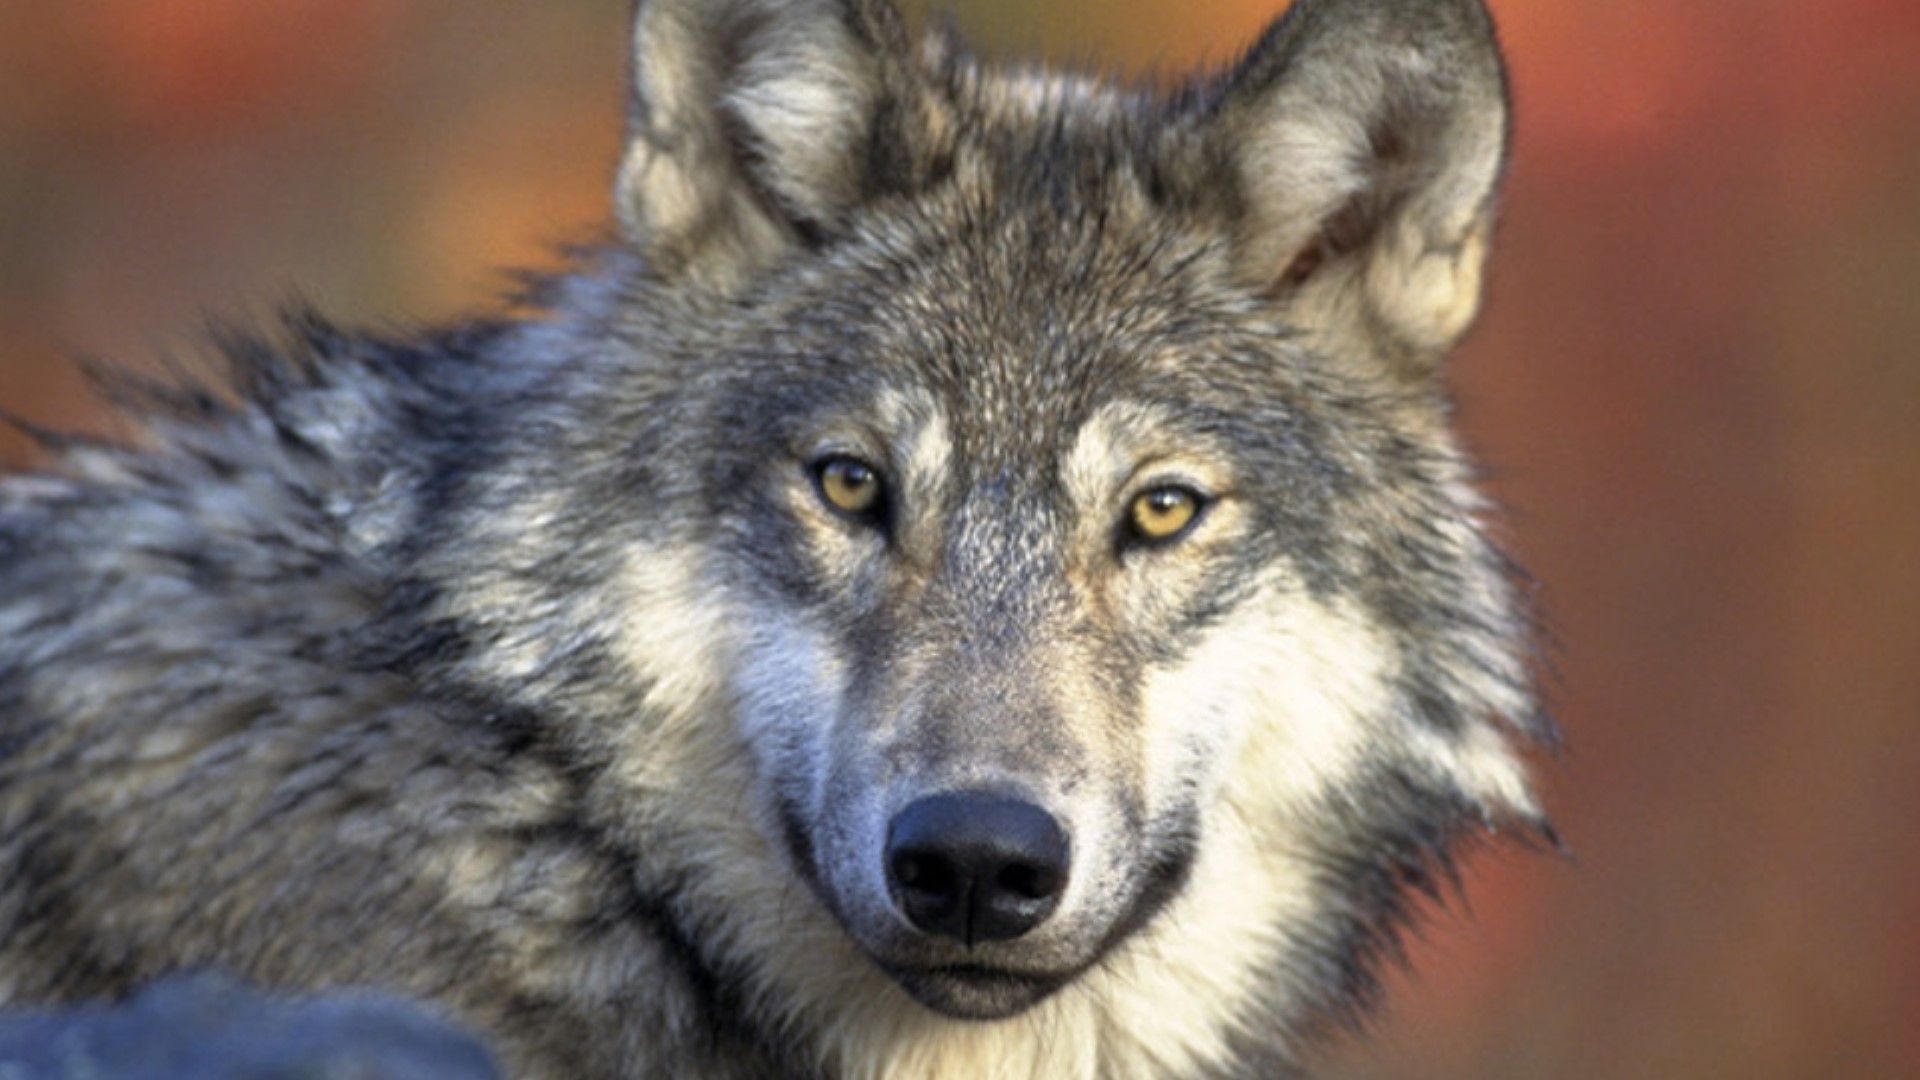 A state veterinarian found that the wolf was infested with tapeworms.